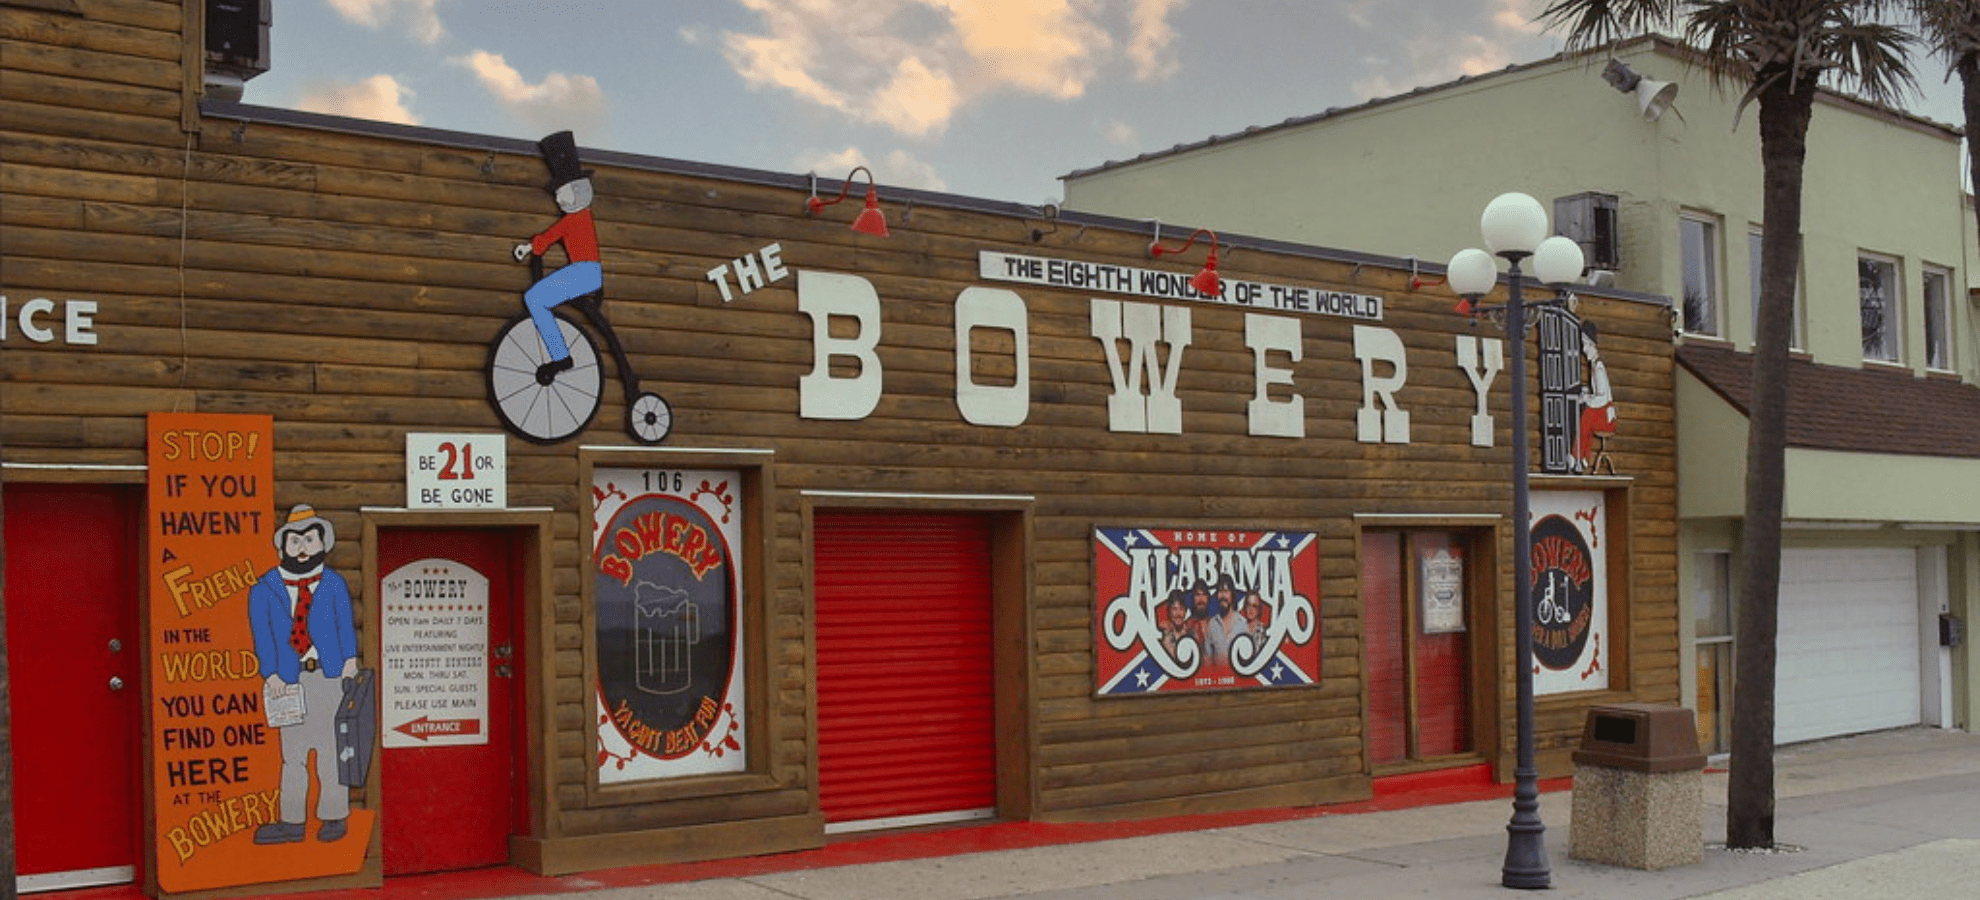 Celebrating The Bowery, Myrtle Beach’s Iconic Dive Bar